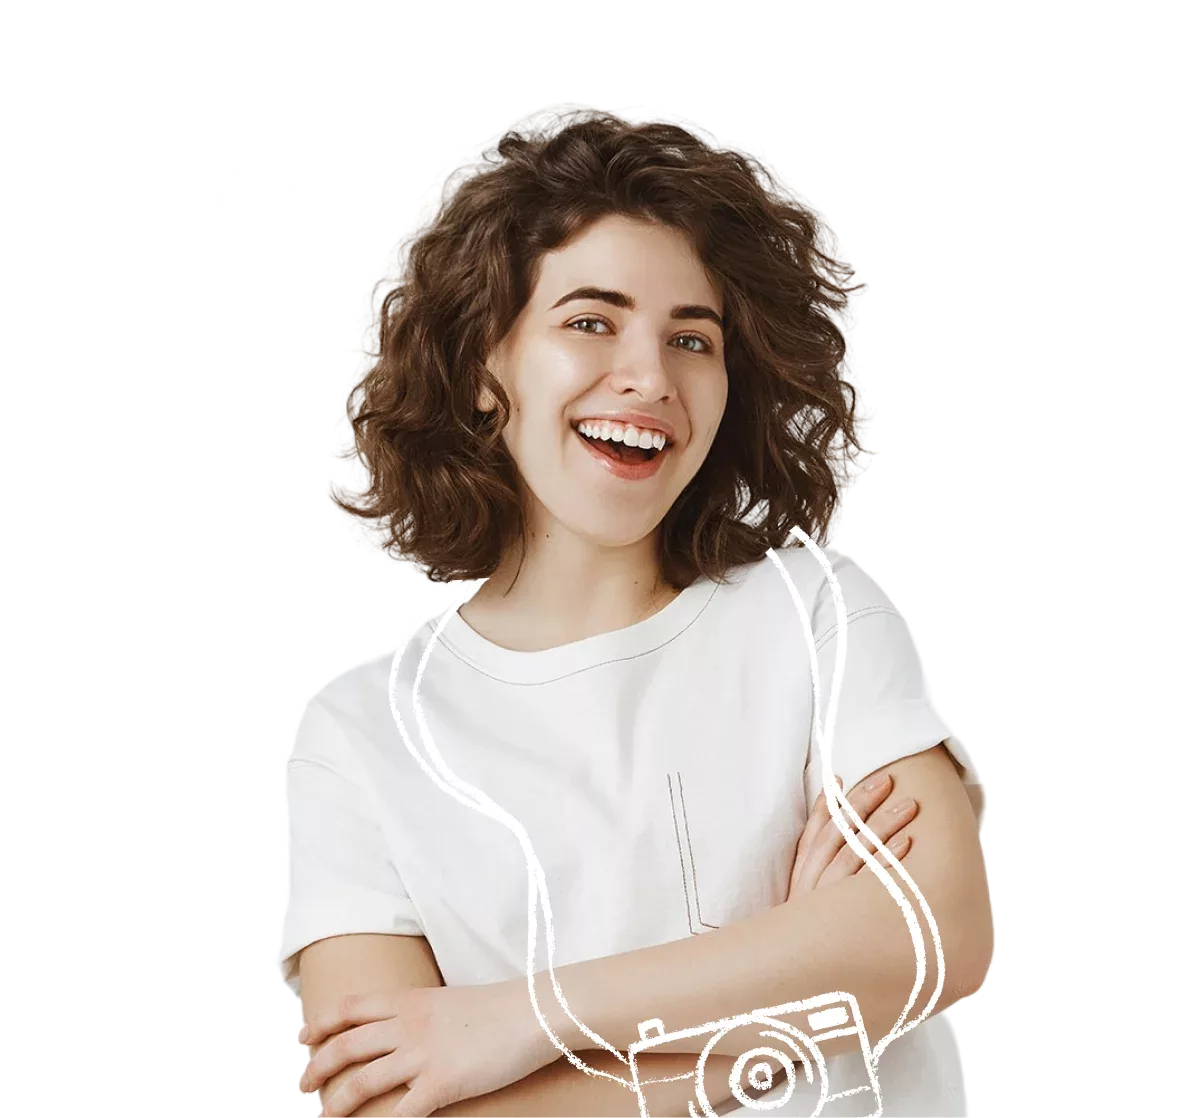 Smiling woman with playful illustration